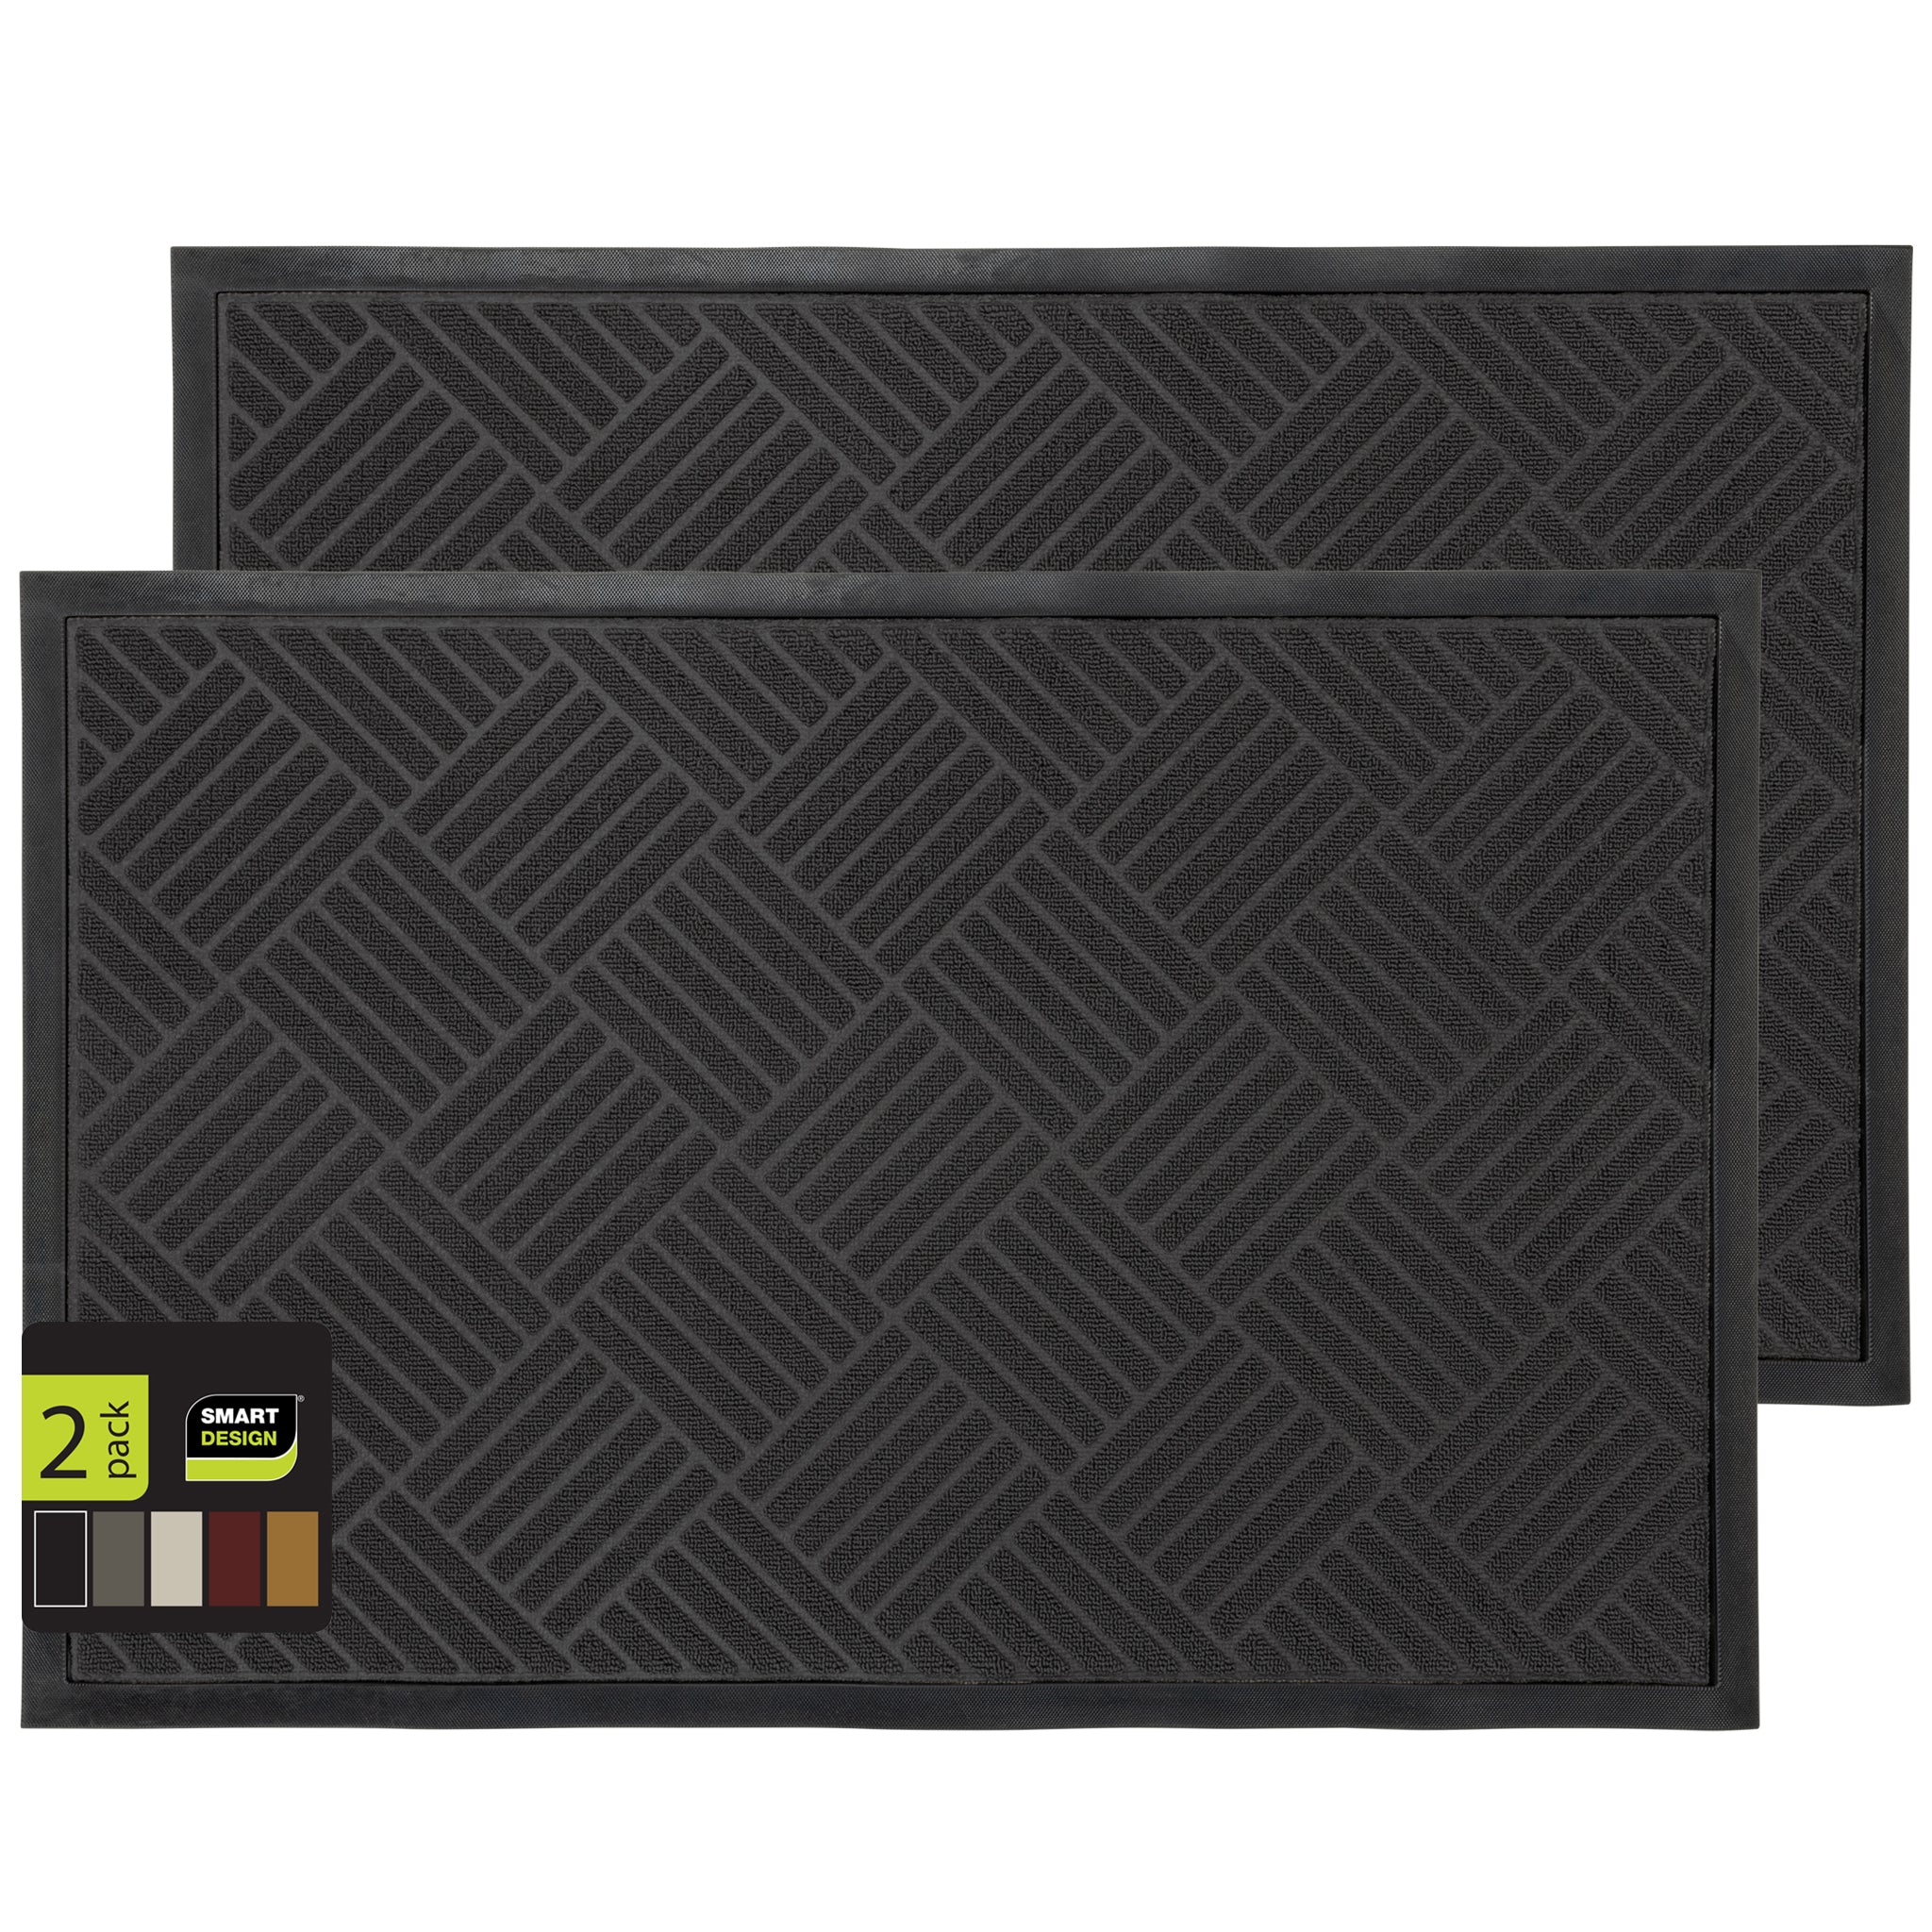 https://cdn.shopify.com/s/files/1/2393/7799/products/large-all-weather-door-mat-diamond-smart-design-7004418-incrementing-number-291021.jpg?v=1679341590